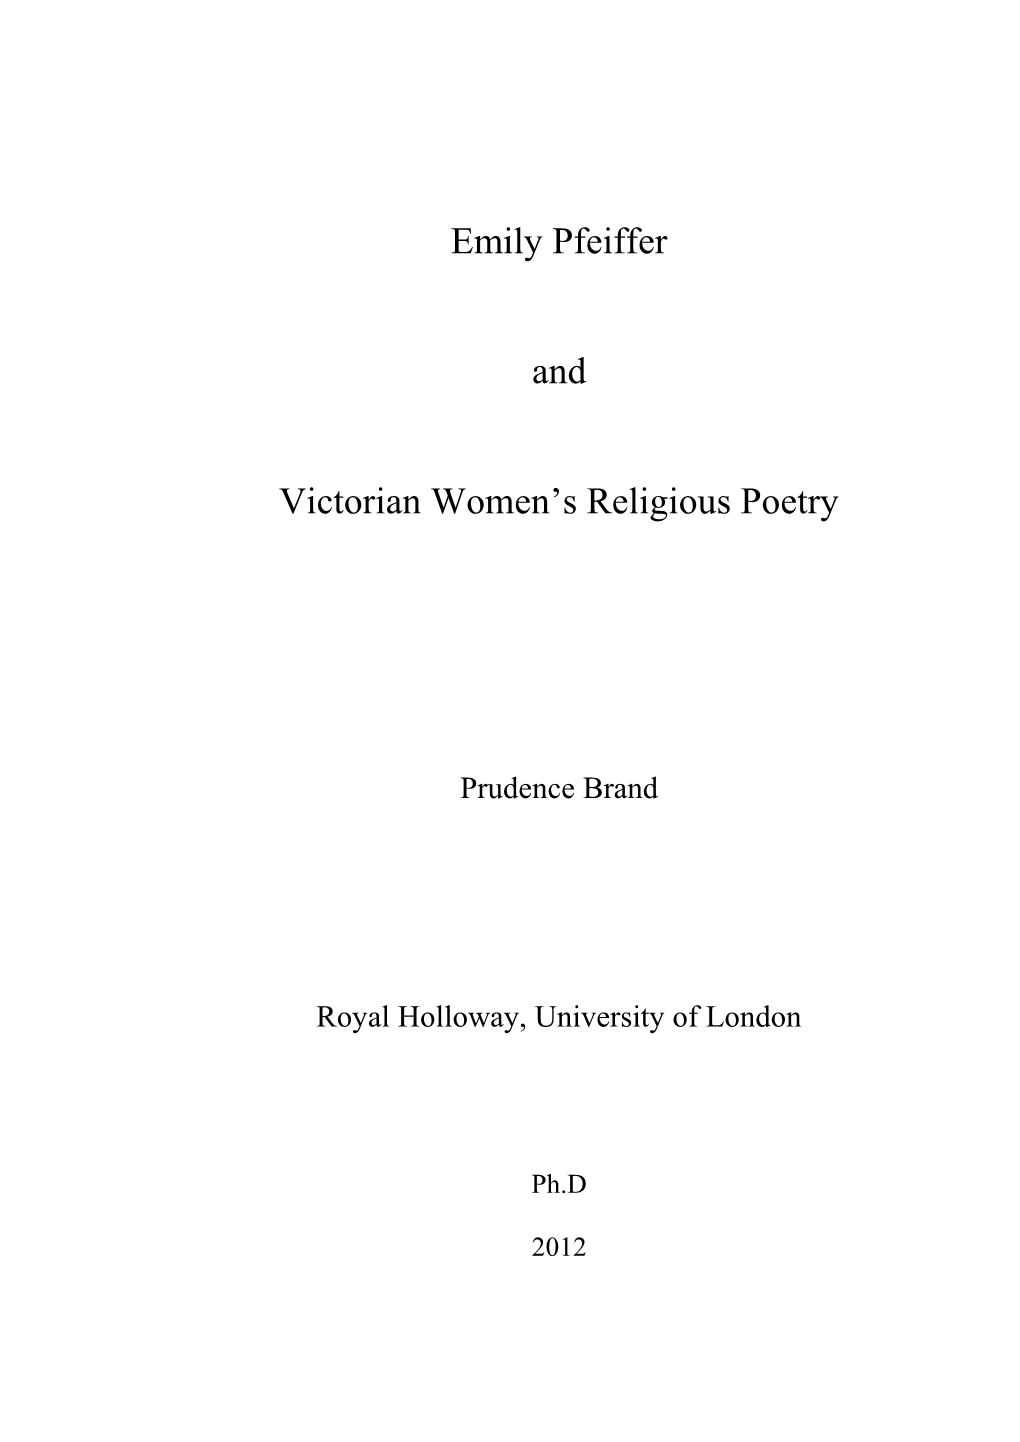 Emily Pfeiffer and Victorian Women's Religious Poetry